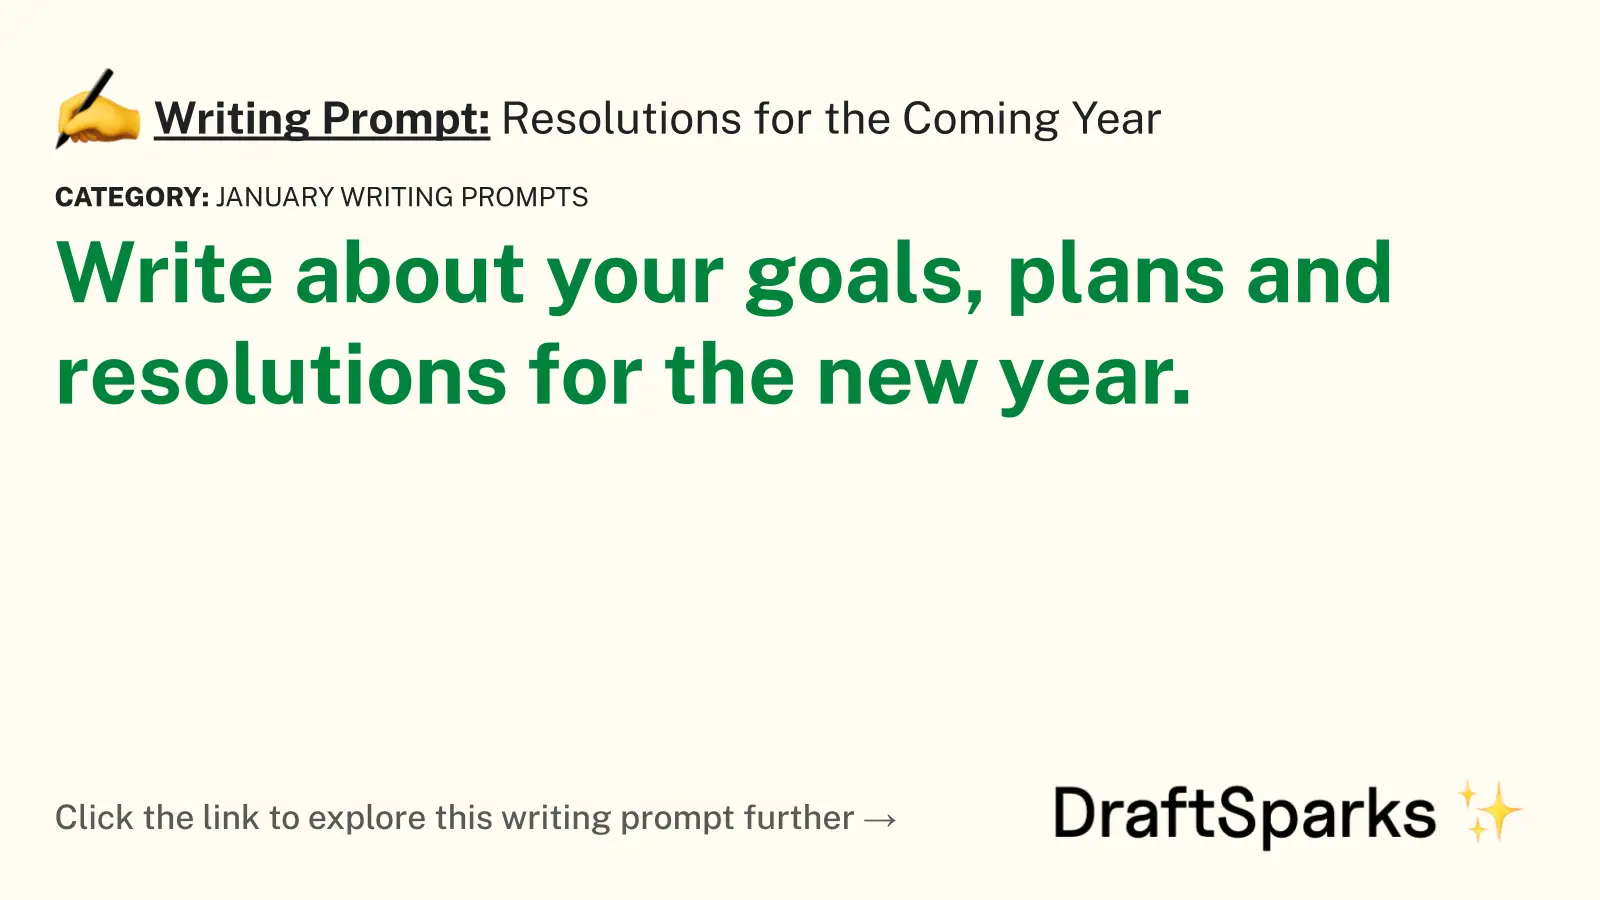 Resolutions for the Coming Year